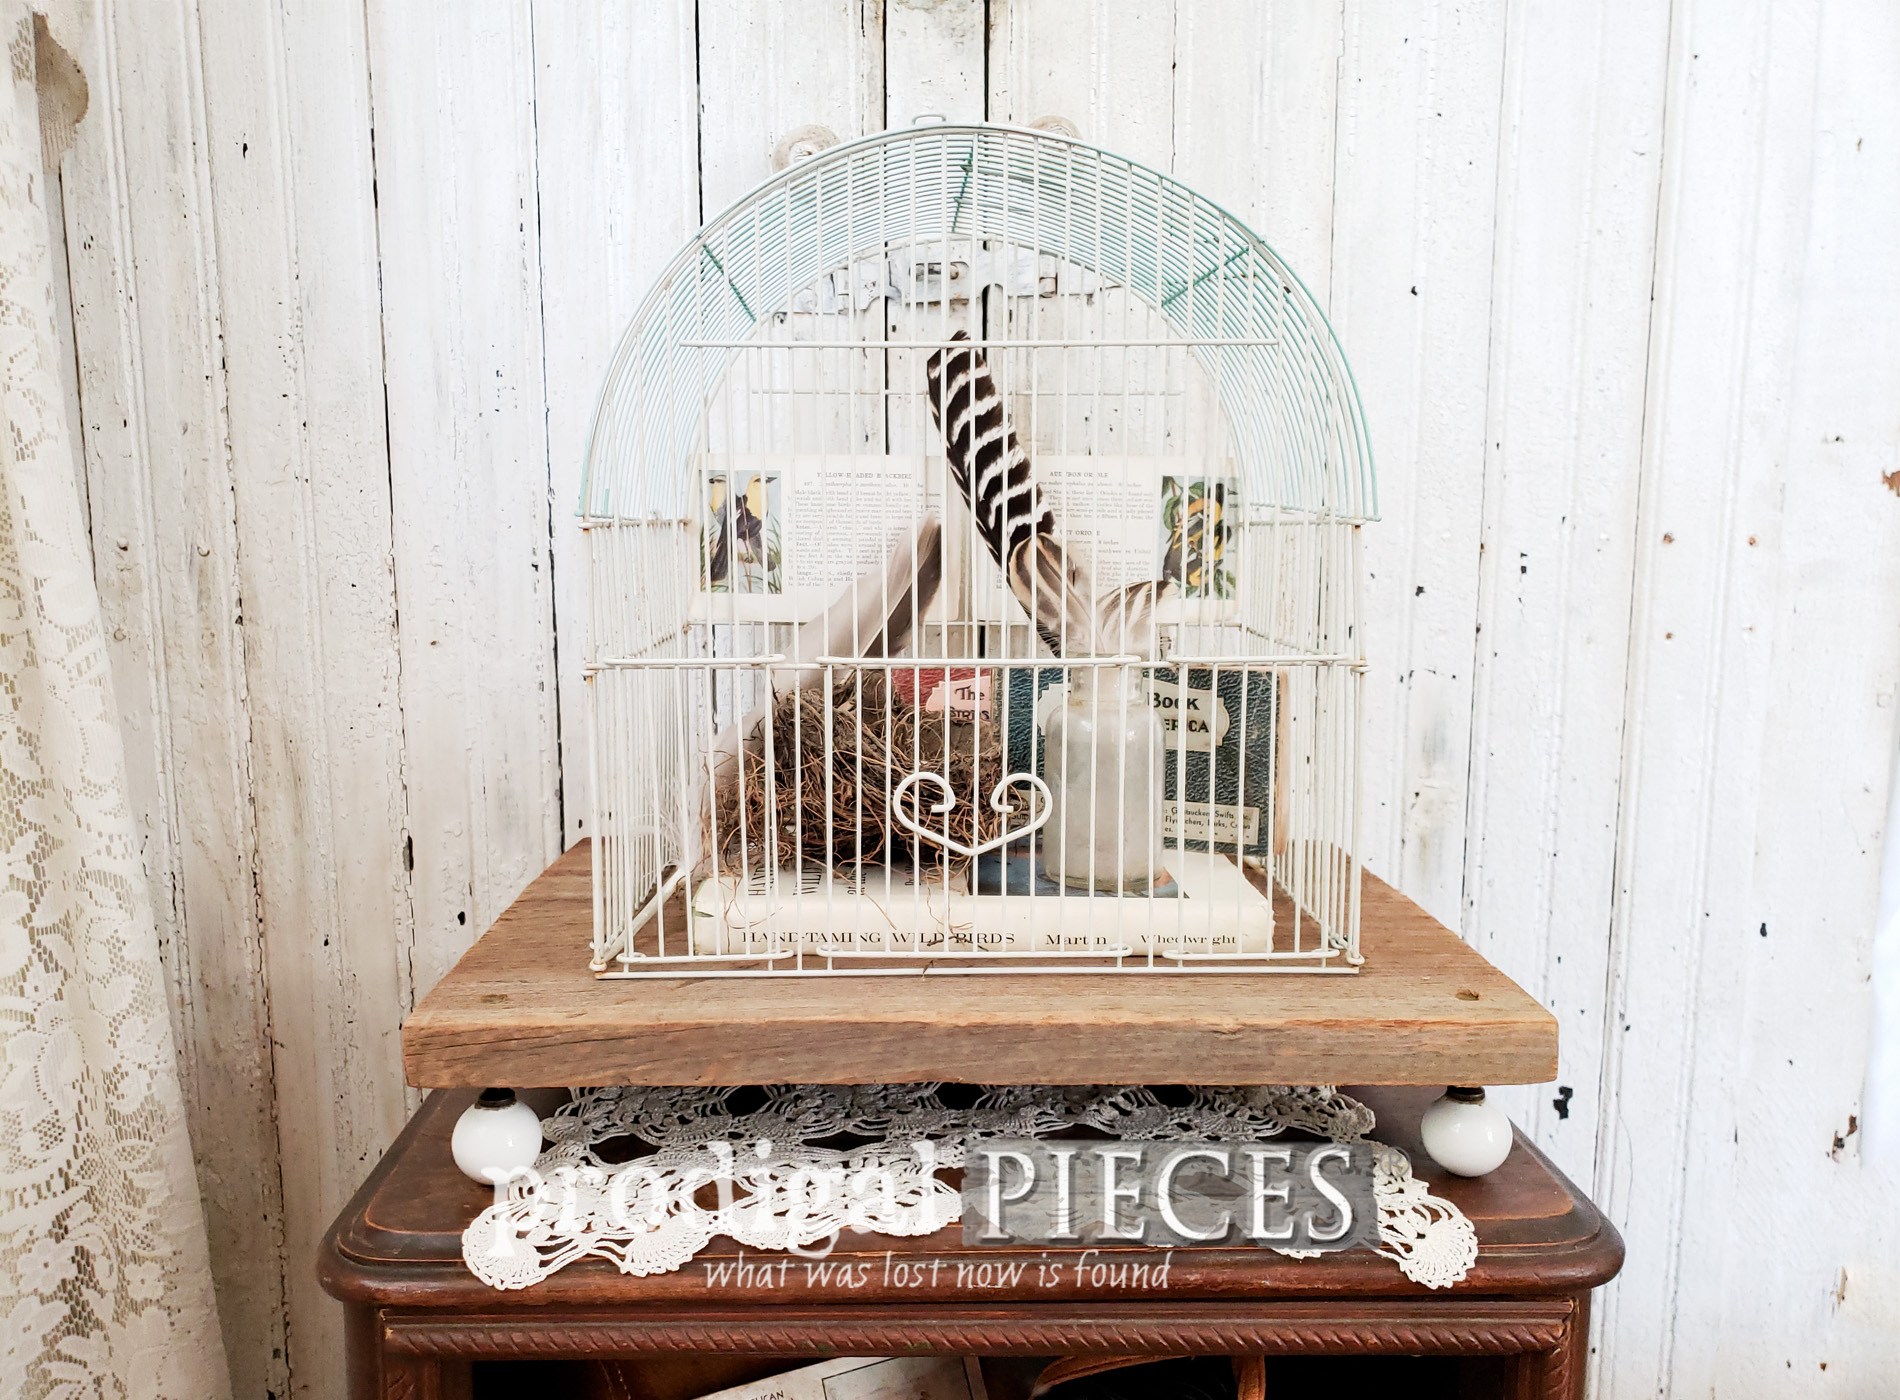 Featured Upcycled Bird Cage Made into Rustic Chic Farmhouse Decor by Larissa of Prodigal Pieces | prodigalpieces.com #prodigalpieces #diy #home #farmhouse #homedecor